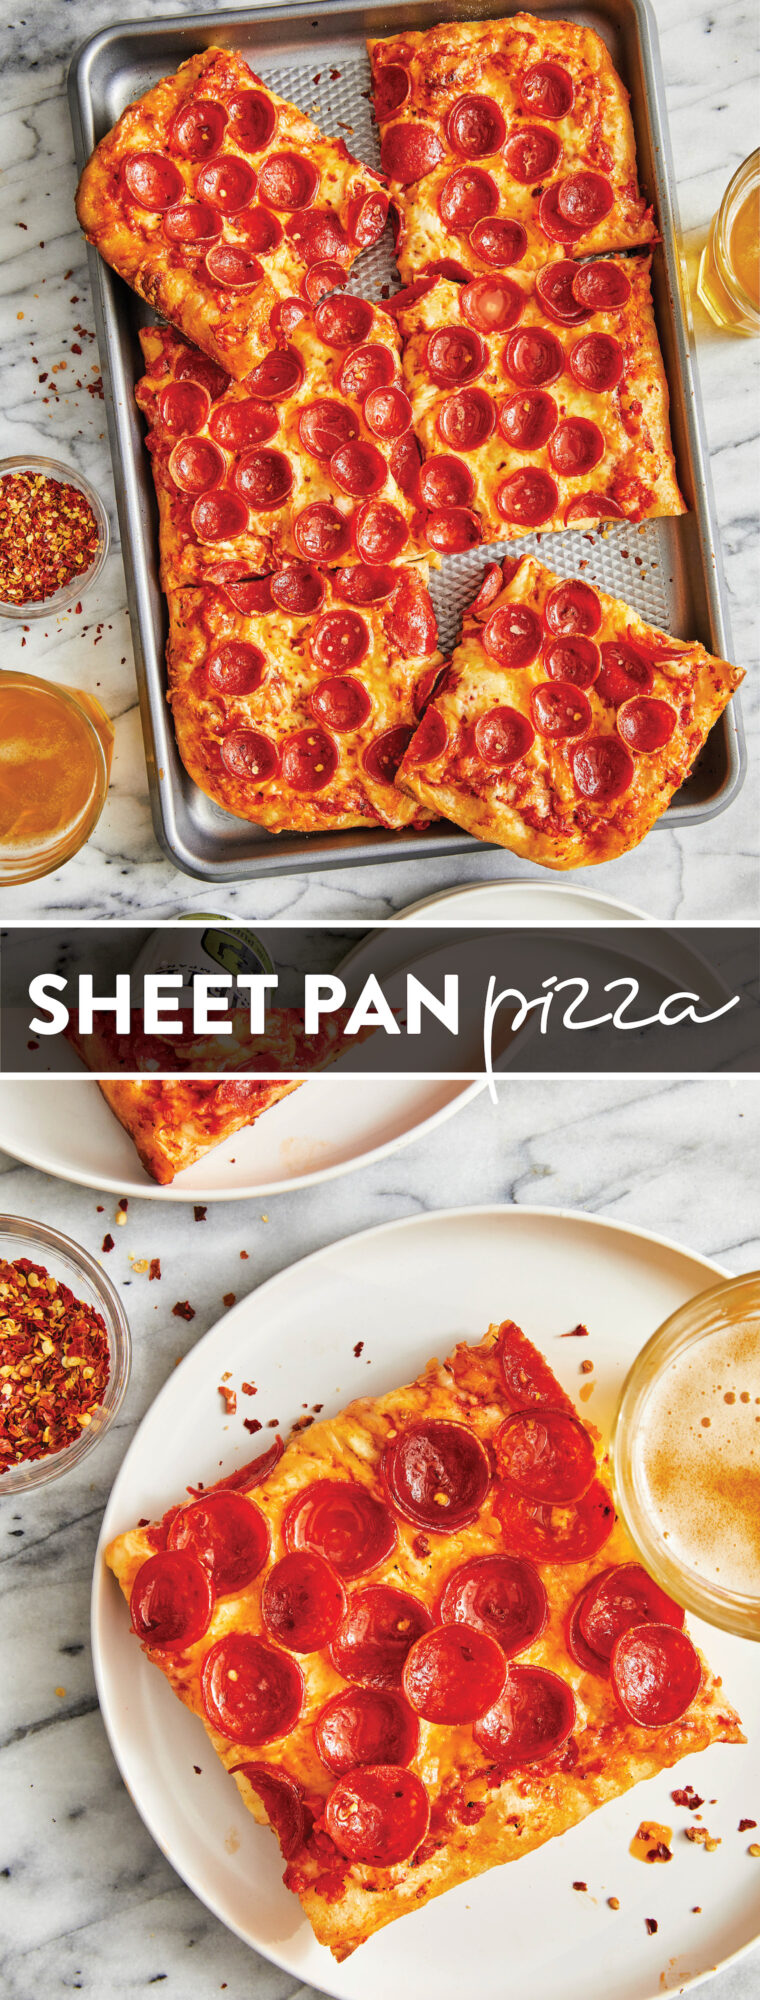 Sheet Pan Pizza - SO EASY + family-friendly! Keep it plain with cheese or add all your favorite toppings - pepperoni, sausage, and/or veggies!